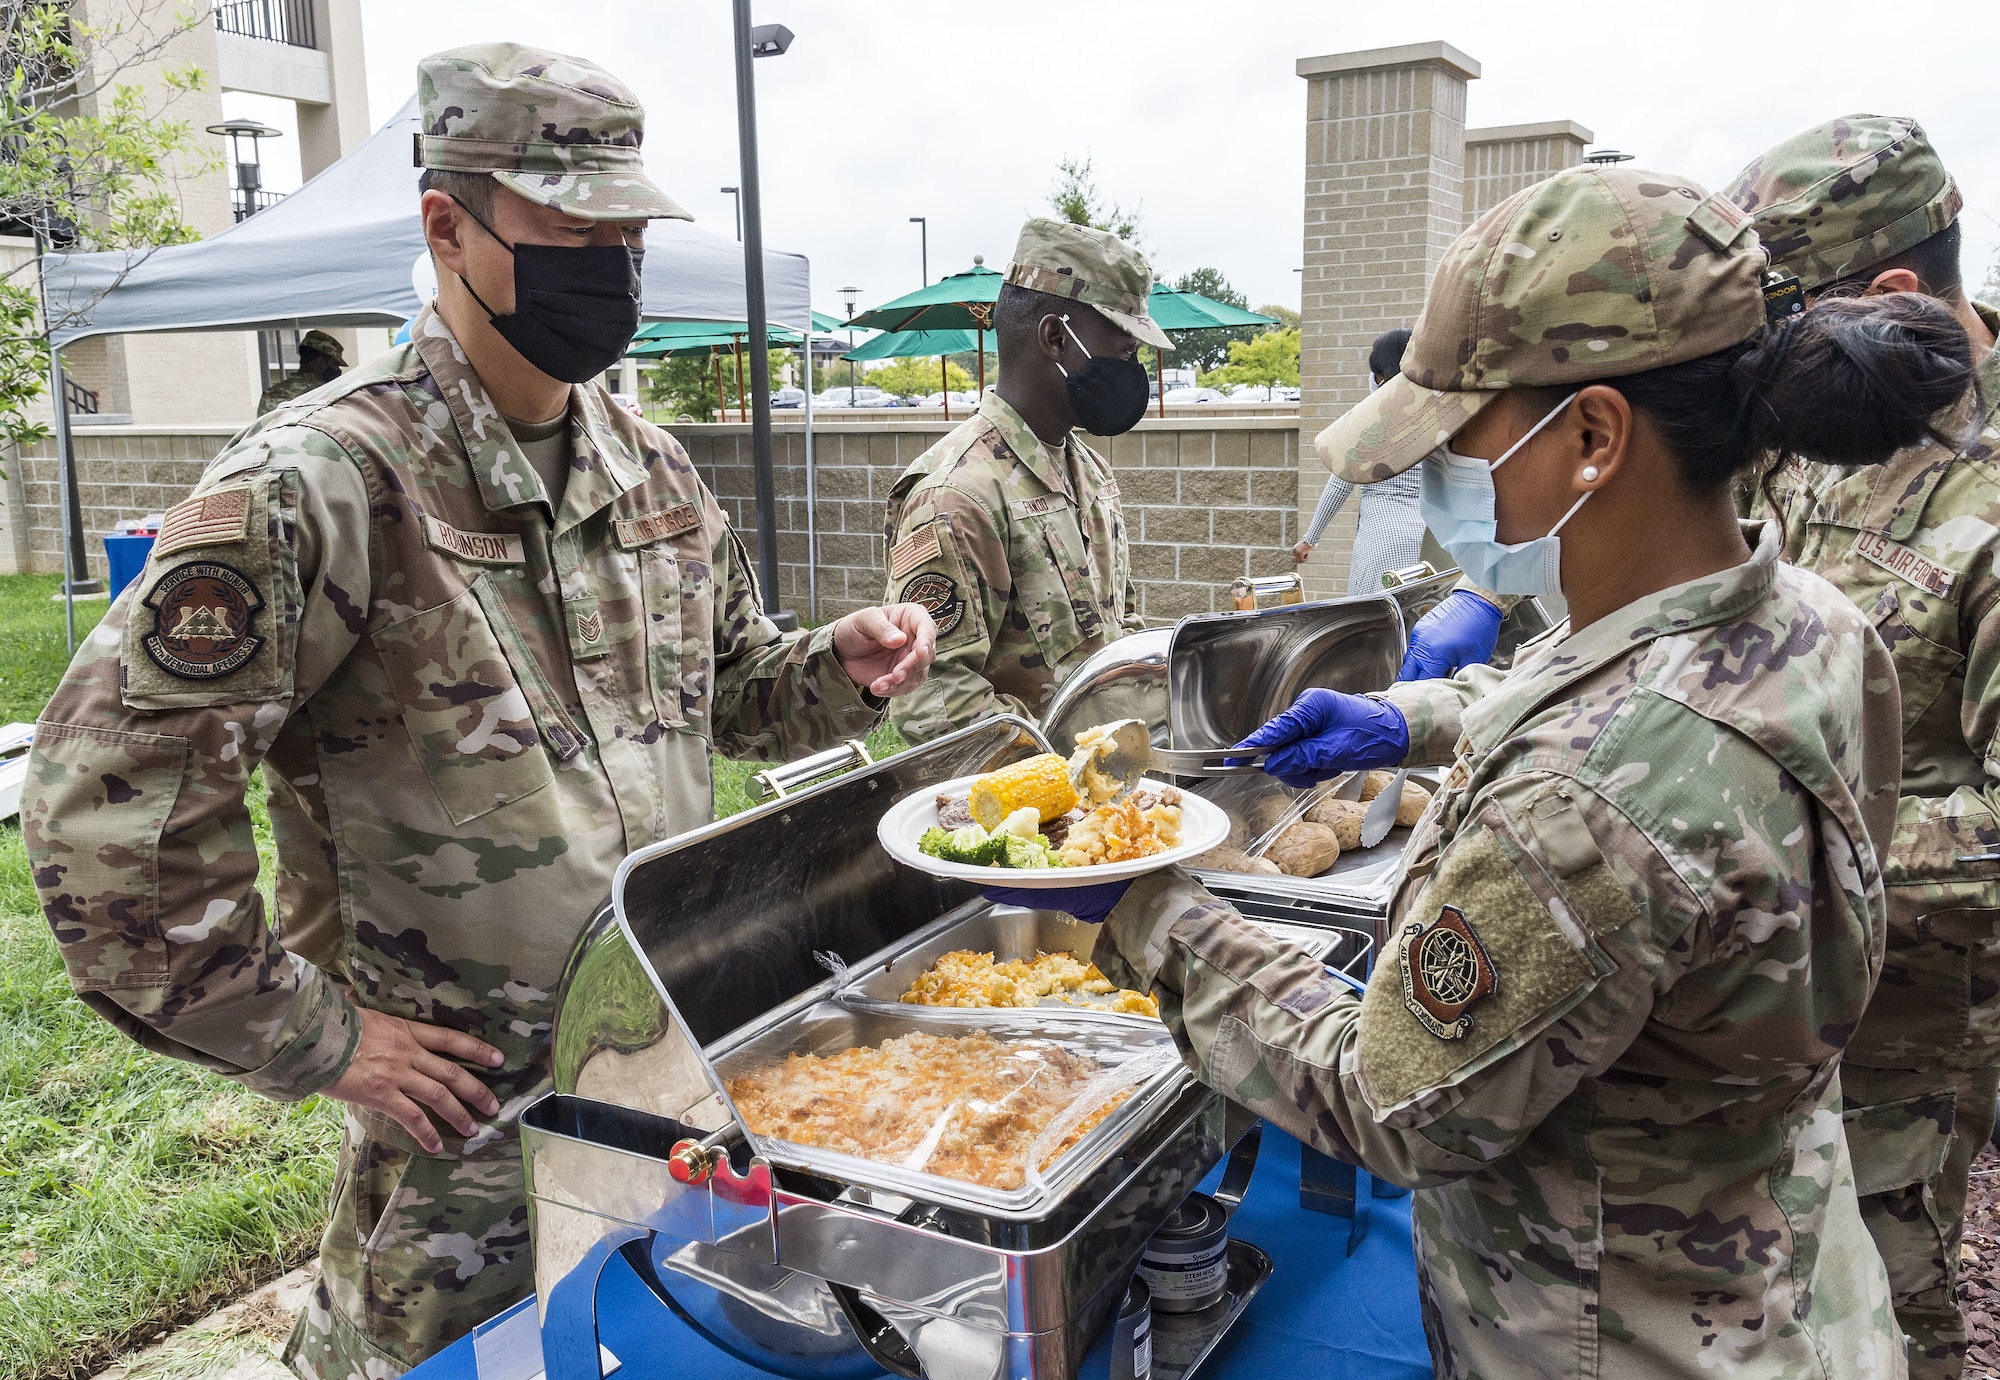 Staff Sgt. Miriam Malapit, right, 436th Force Support Squadron storeroom manager, serves food to Tech. Sgt. Kyle Robinson, left, 512th Mortuary Affairs Squadron mortuary technician at the Patterson Dining Facility on Dover Air Force Base, Delaware, Sept. 17, 2021. The DFAC held a picnic-style lunch commemorating the grand reopening, as well as a cake cutting celebrating the Air Force’s 74th birthday. (U.S. Air Force photo by Roland Balik)